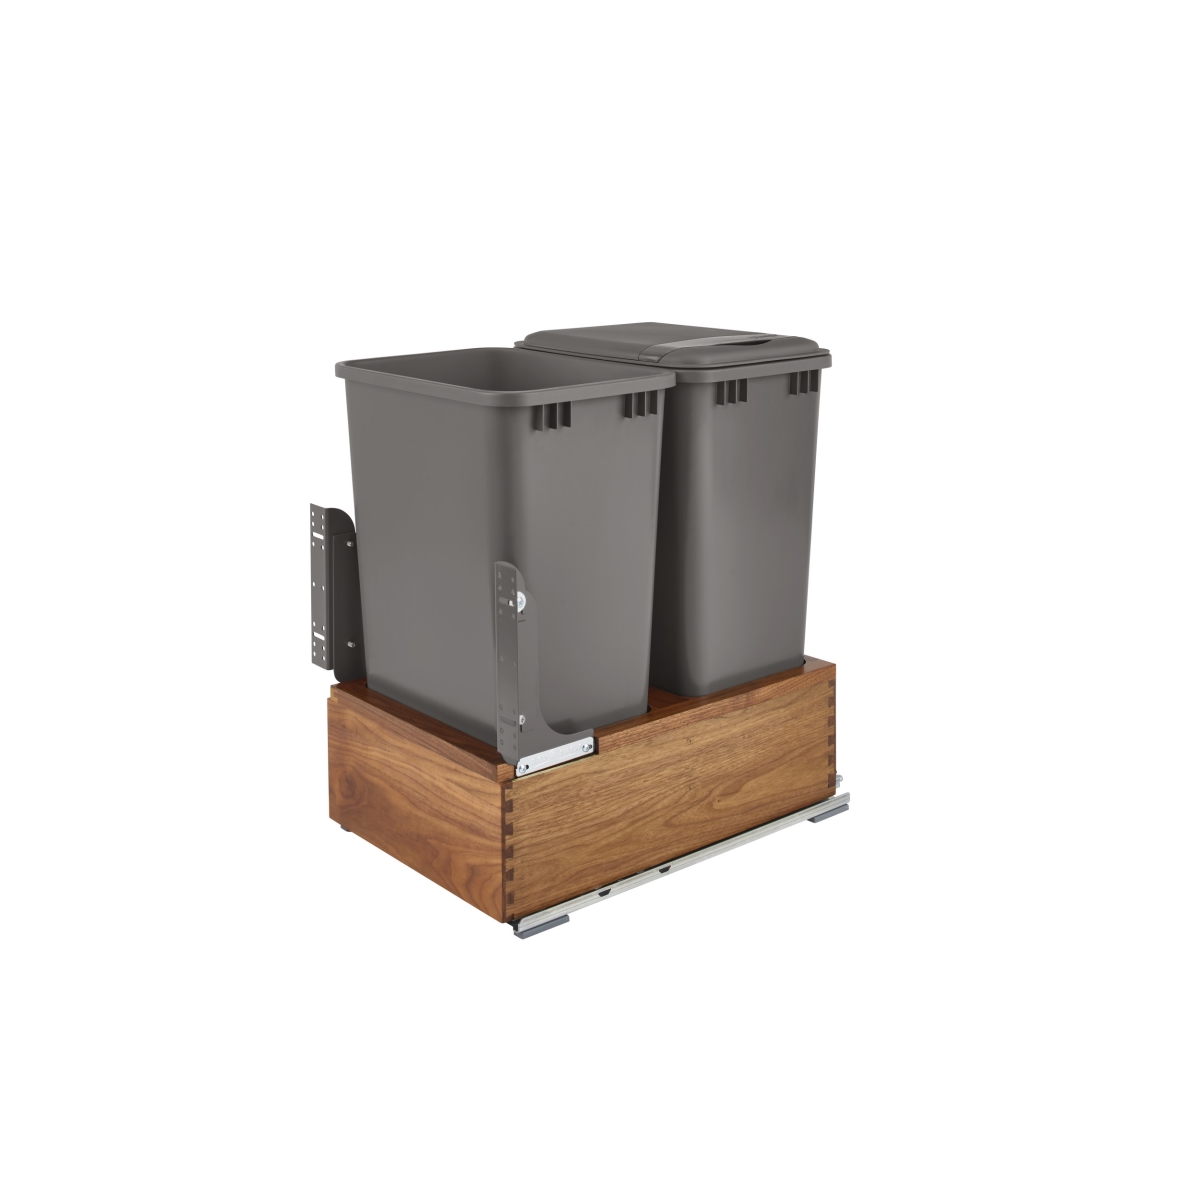 Double 50 Qt 4wc Series Bottom Mount Trash Pull-out With Blum Movento Soft Close Slides, Walnut